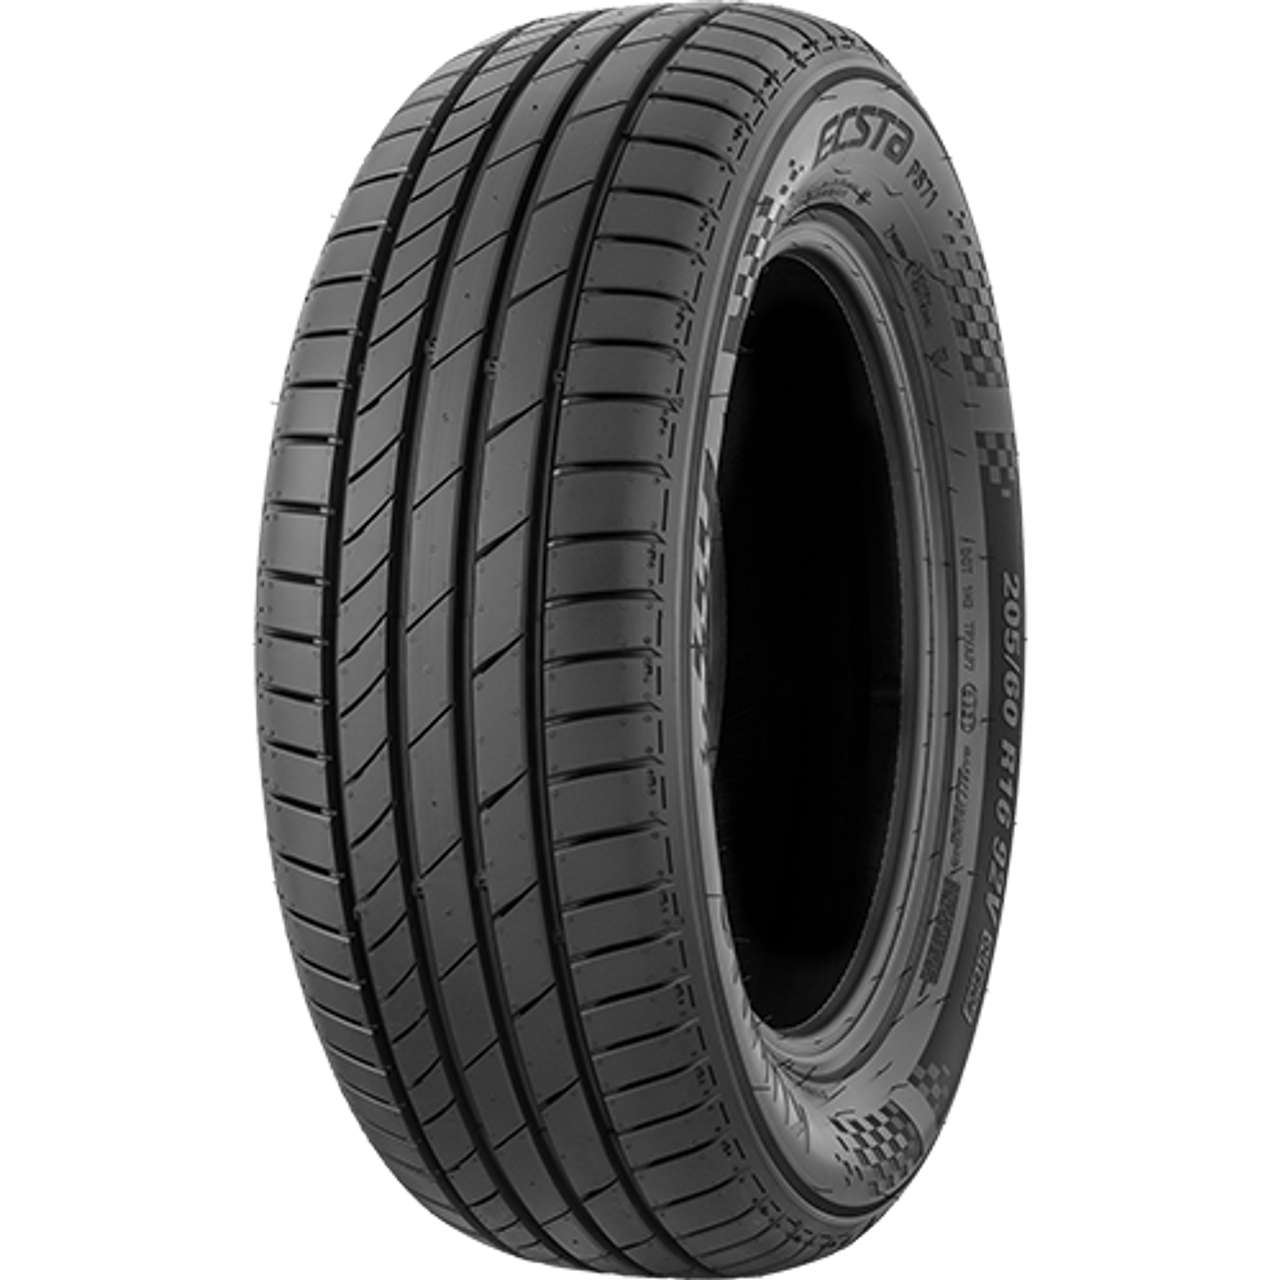 KUMHO ECSTA PS71 275/45ZR20 110Y BSW